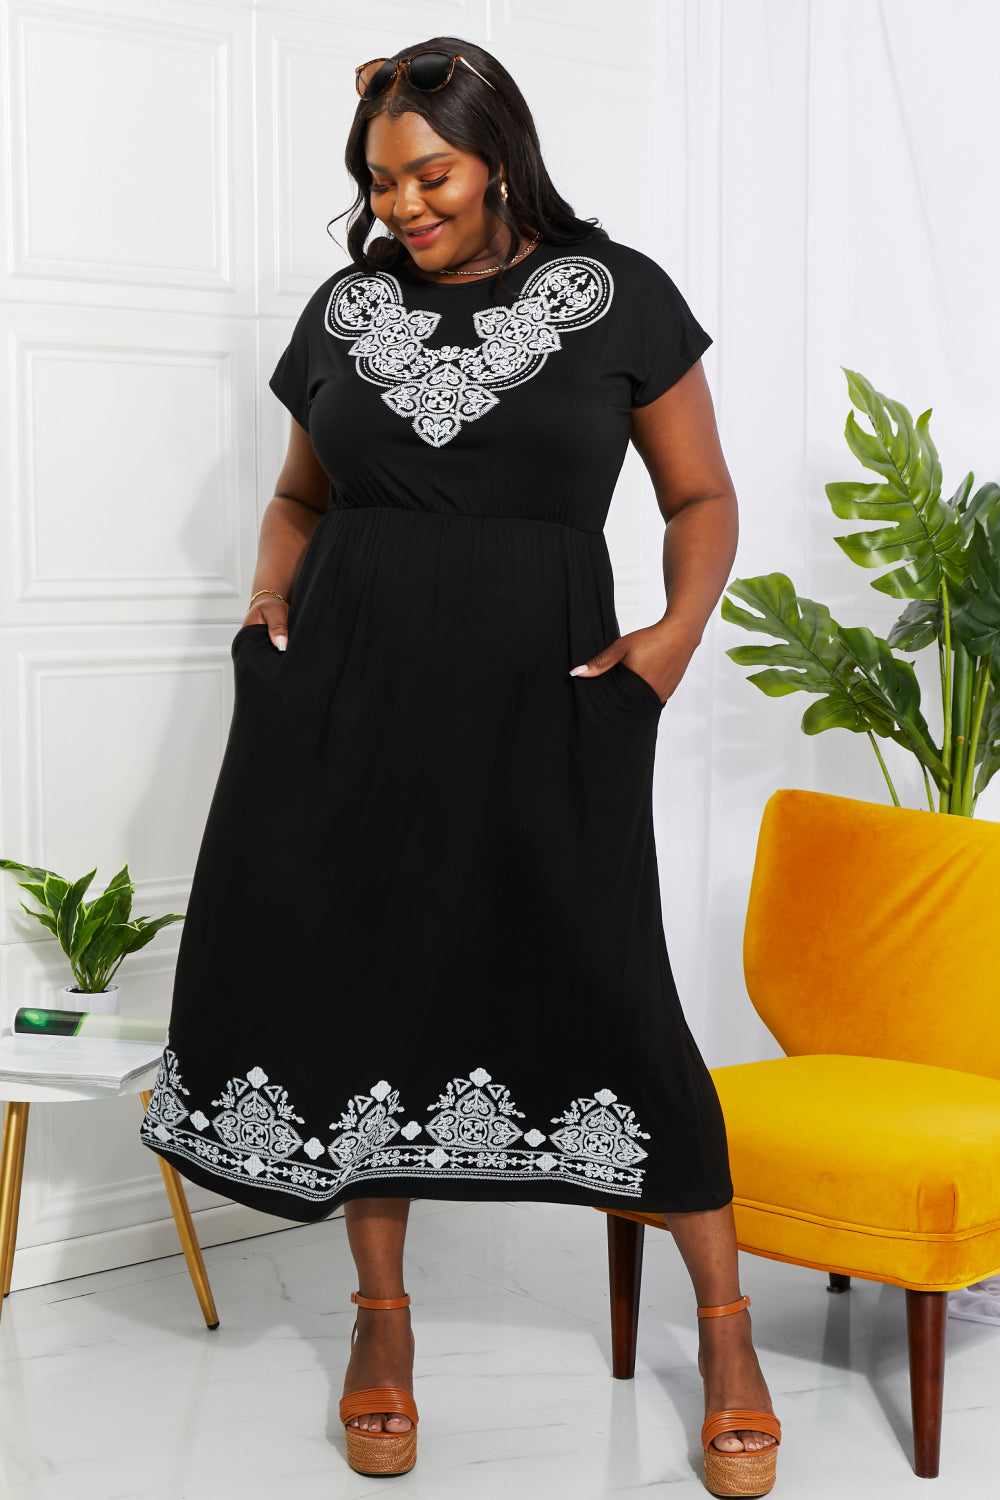 Damask Black and White Dress with short sleeves hitting below the calf and above the ankle